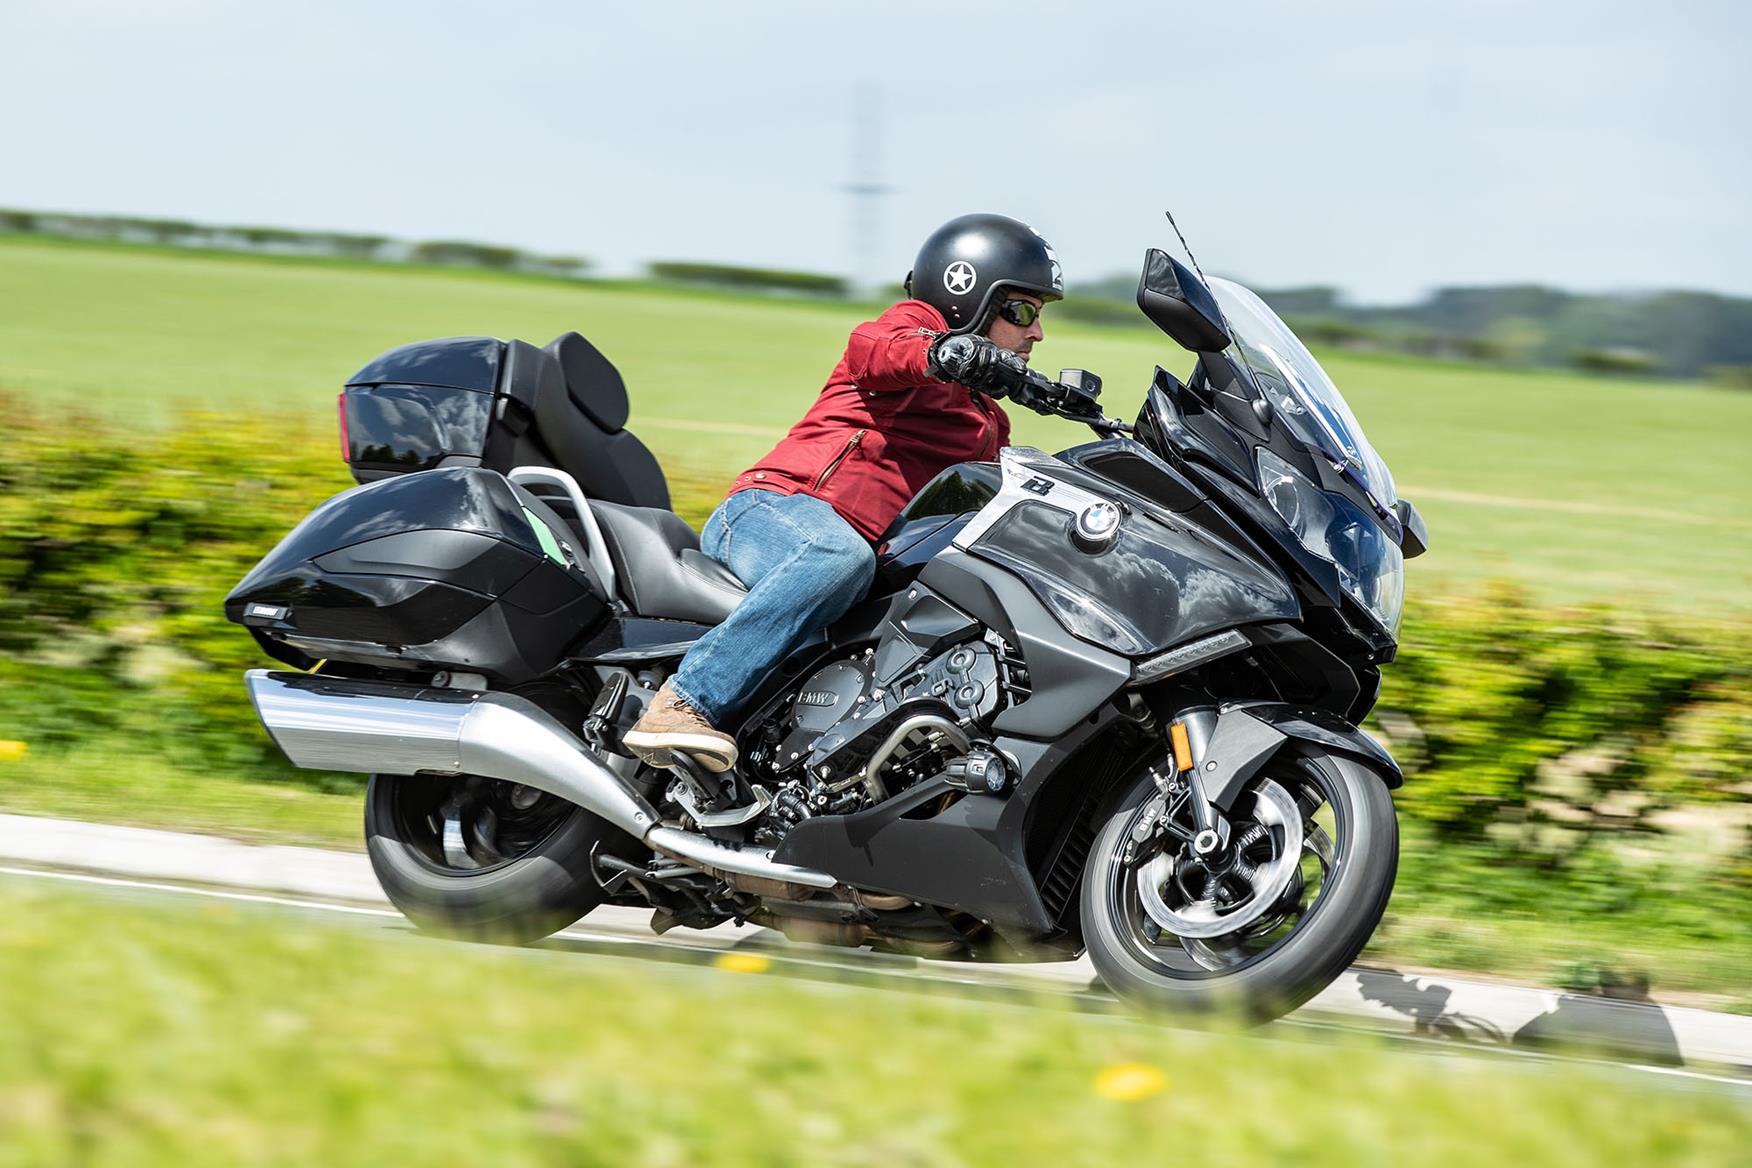 BMW K1600 GRAND AMERICA (2018-on) Motorcycle Review | MCN